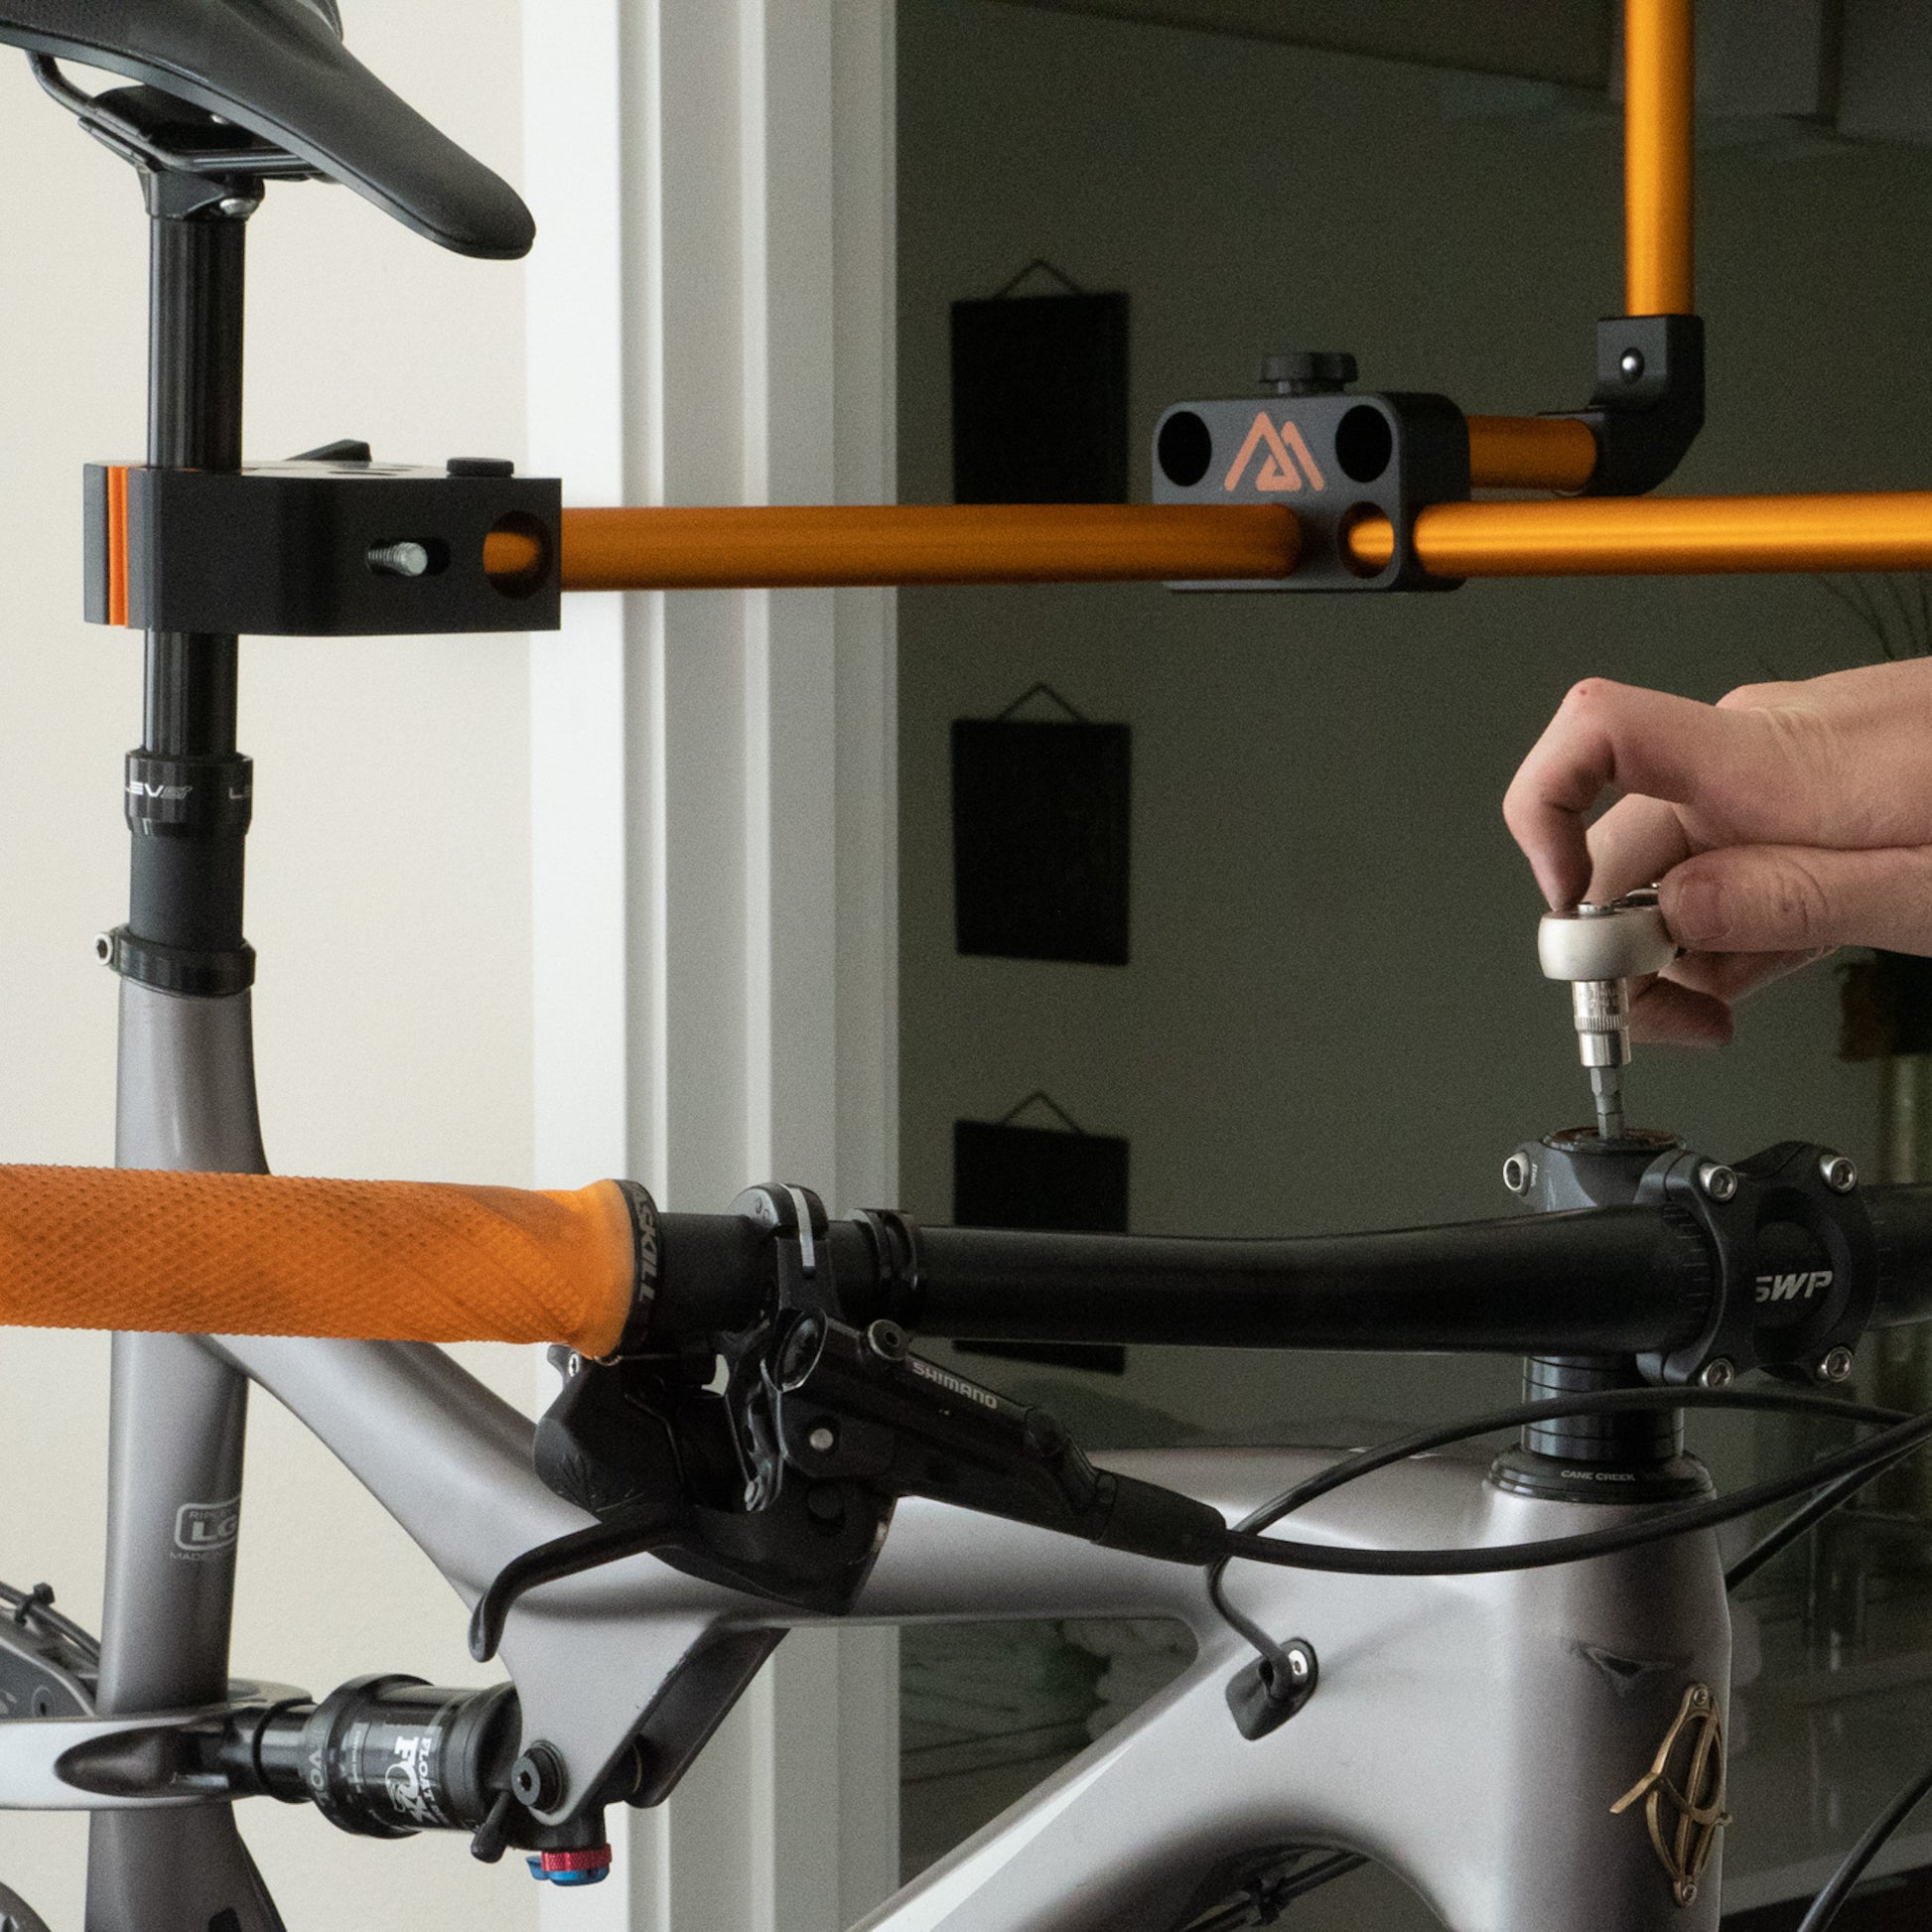 The Hangar hangs from any standard door frame, allowing you to easily work on your bike 